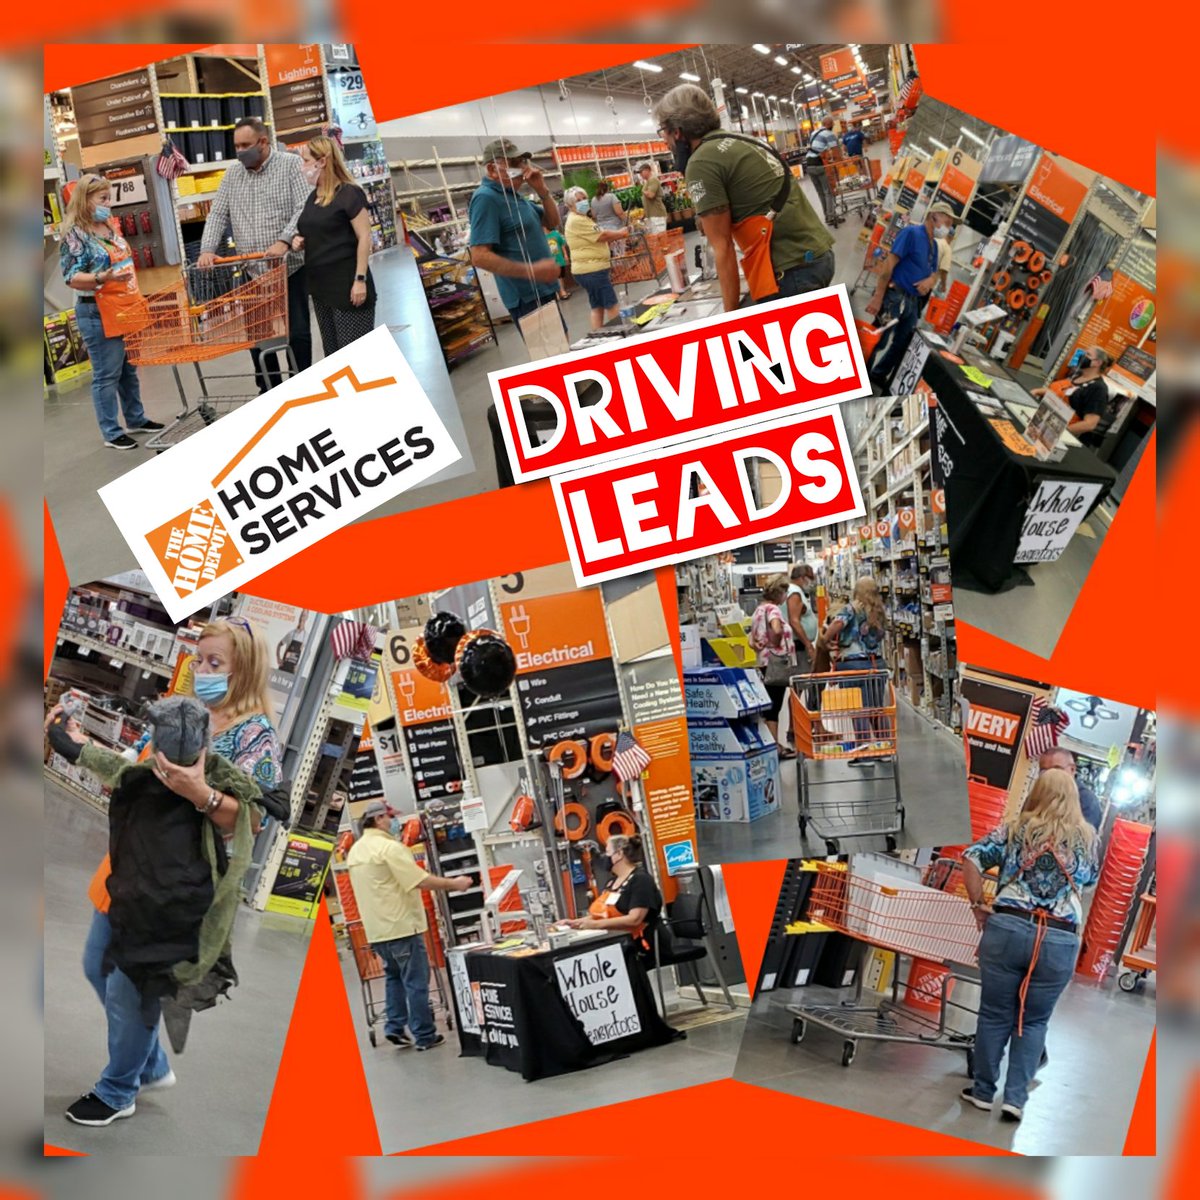 Driving Services over the weekend. You can run, you can hide but my specialists will FIND you and offer you some of our HOME SERVICES! Having fun driving LEADS! #HomeServices #DancingWithWolves
 @MarkDor58229257 @SeanBrownD133 @WeidmanJess @KelliTawney @mikemcgowanhd